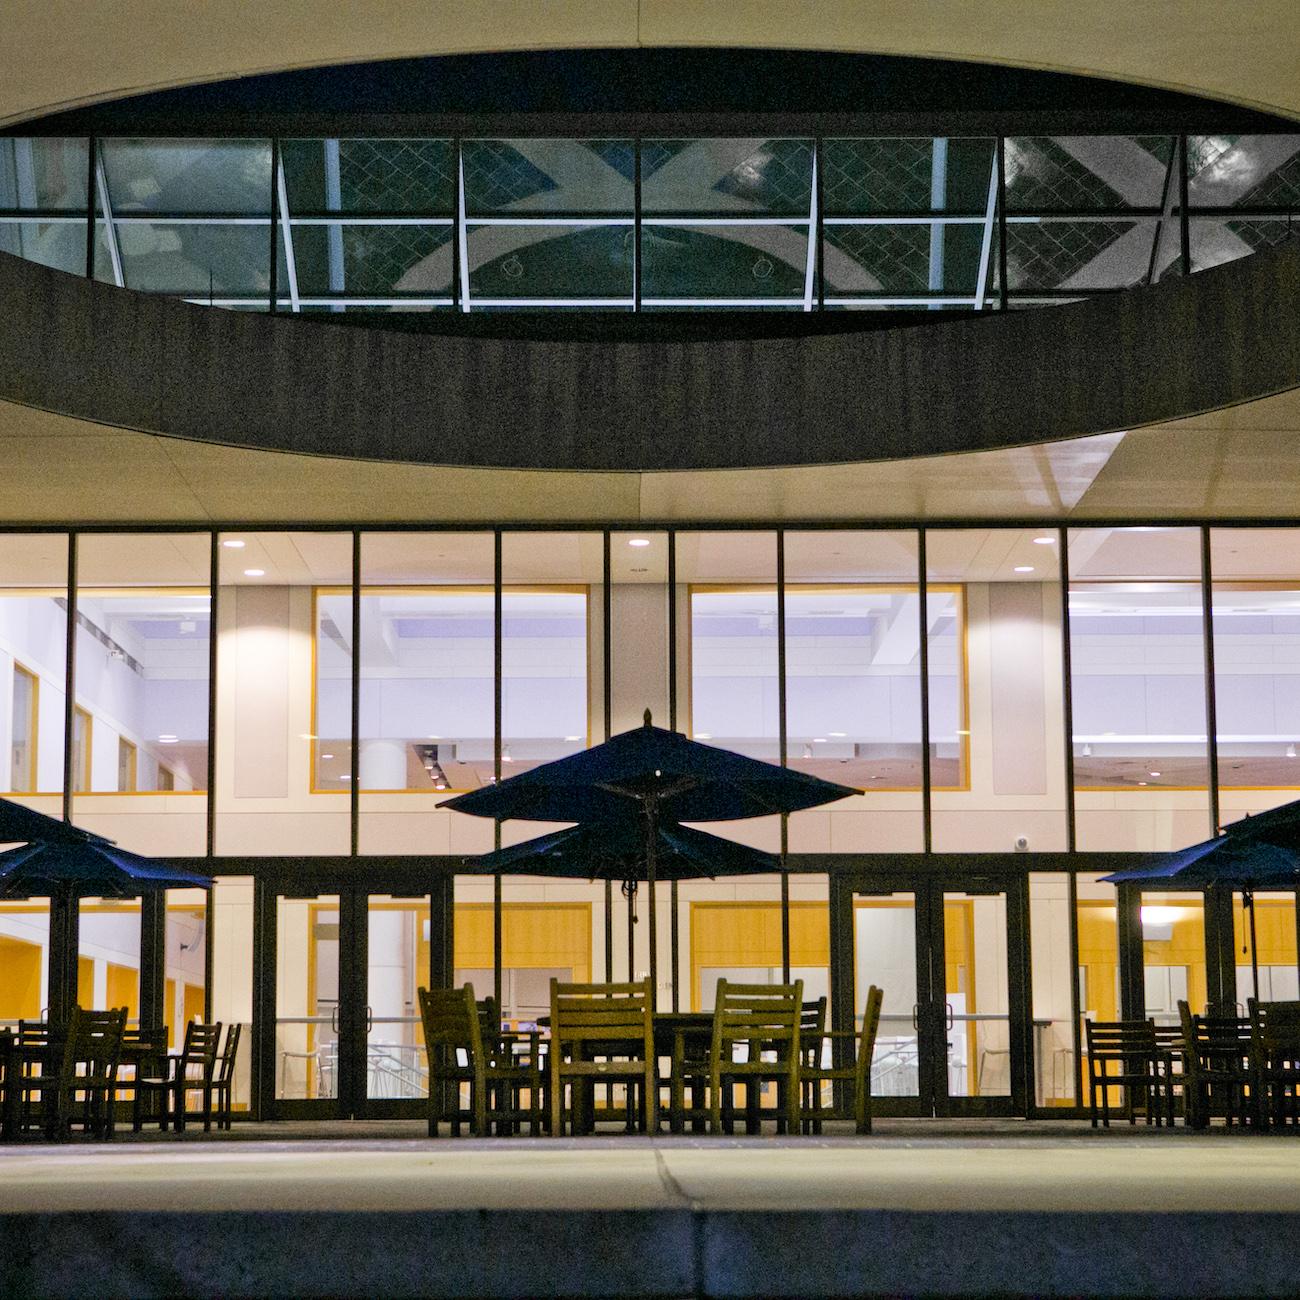 Night shot on the patio outside of Fuqua School of Business.